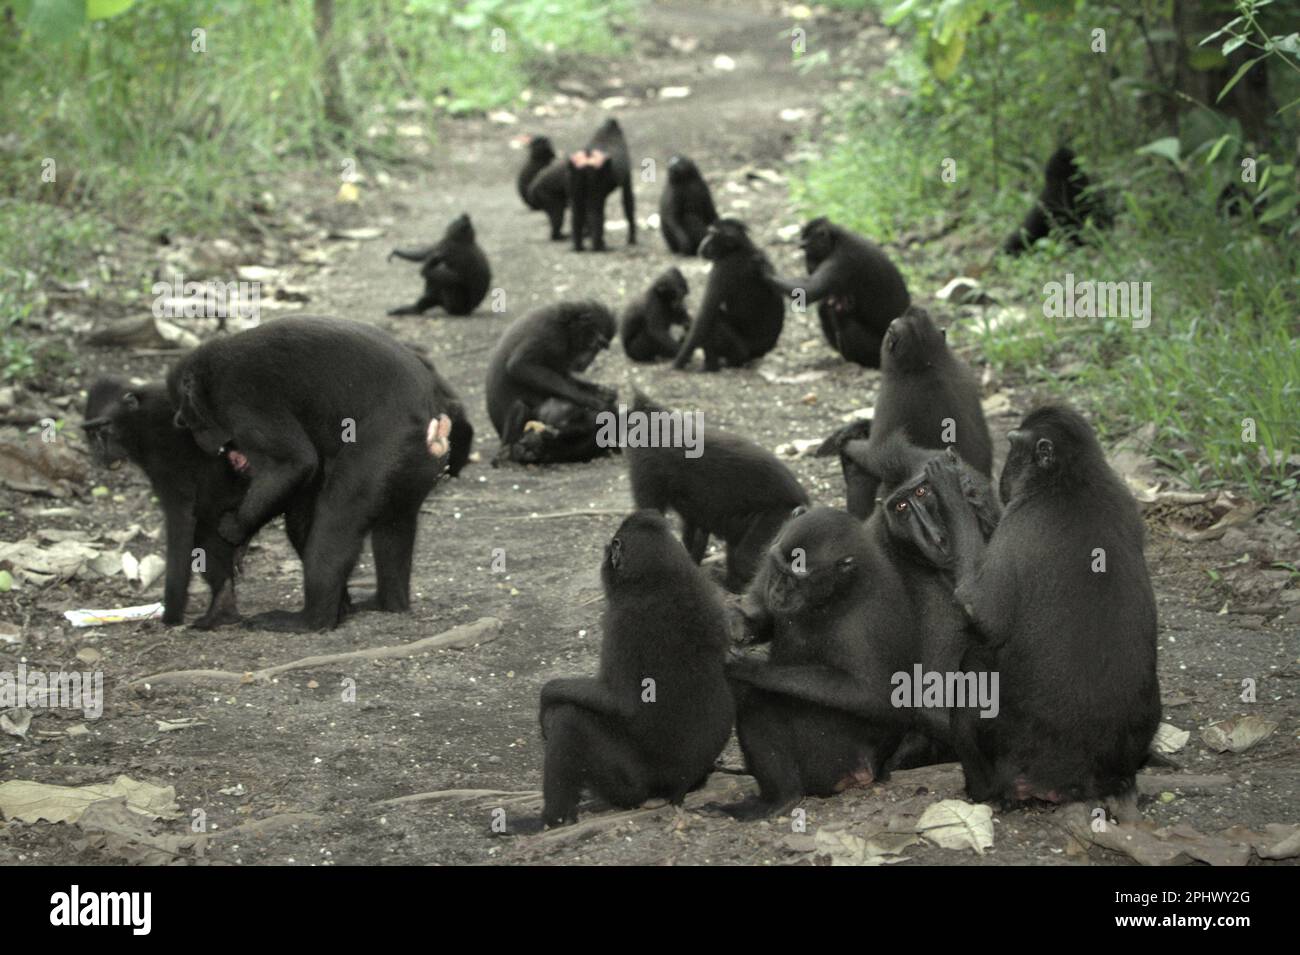 A troop of Sulawesi black-crested macaque (Macaca nigra) is occupying a dirt road in Taman Wisata Alam Tangkoko (Tangkoko Nature Park) near Tangkoko Nature Reserve in North Sulawesi, Indonesia. Through Macaca Nigra Project and others, over several decades, research teams have come to Tangkoko Reserve, relatively a safe habitat, to study this species, according to a March 2023 summary of scientific research papers collection that is edited by a team of primate scientists led by Jatna Supriatna (accessed on Springer). One of the seven macaque species endemic to the island of Sulawesi, the... Stock Photo